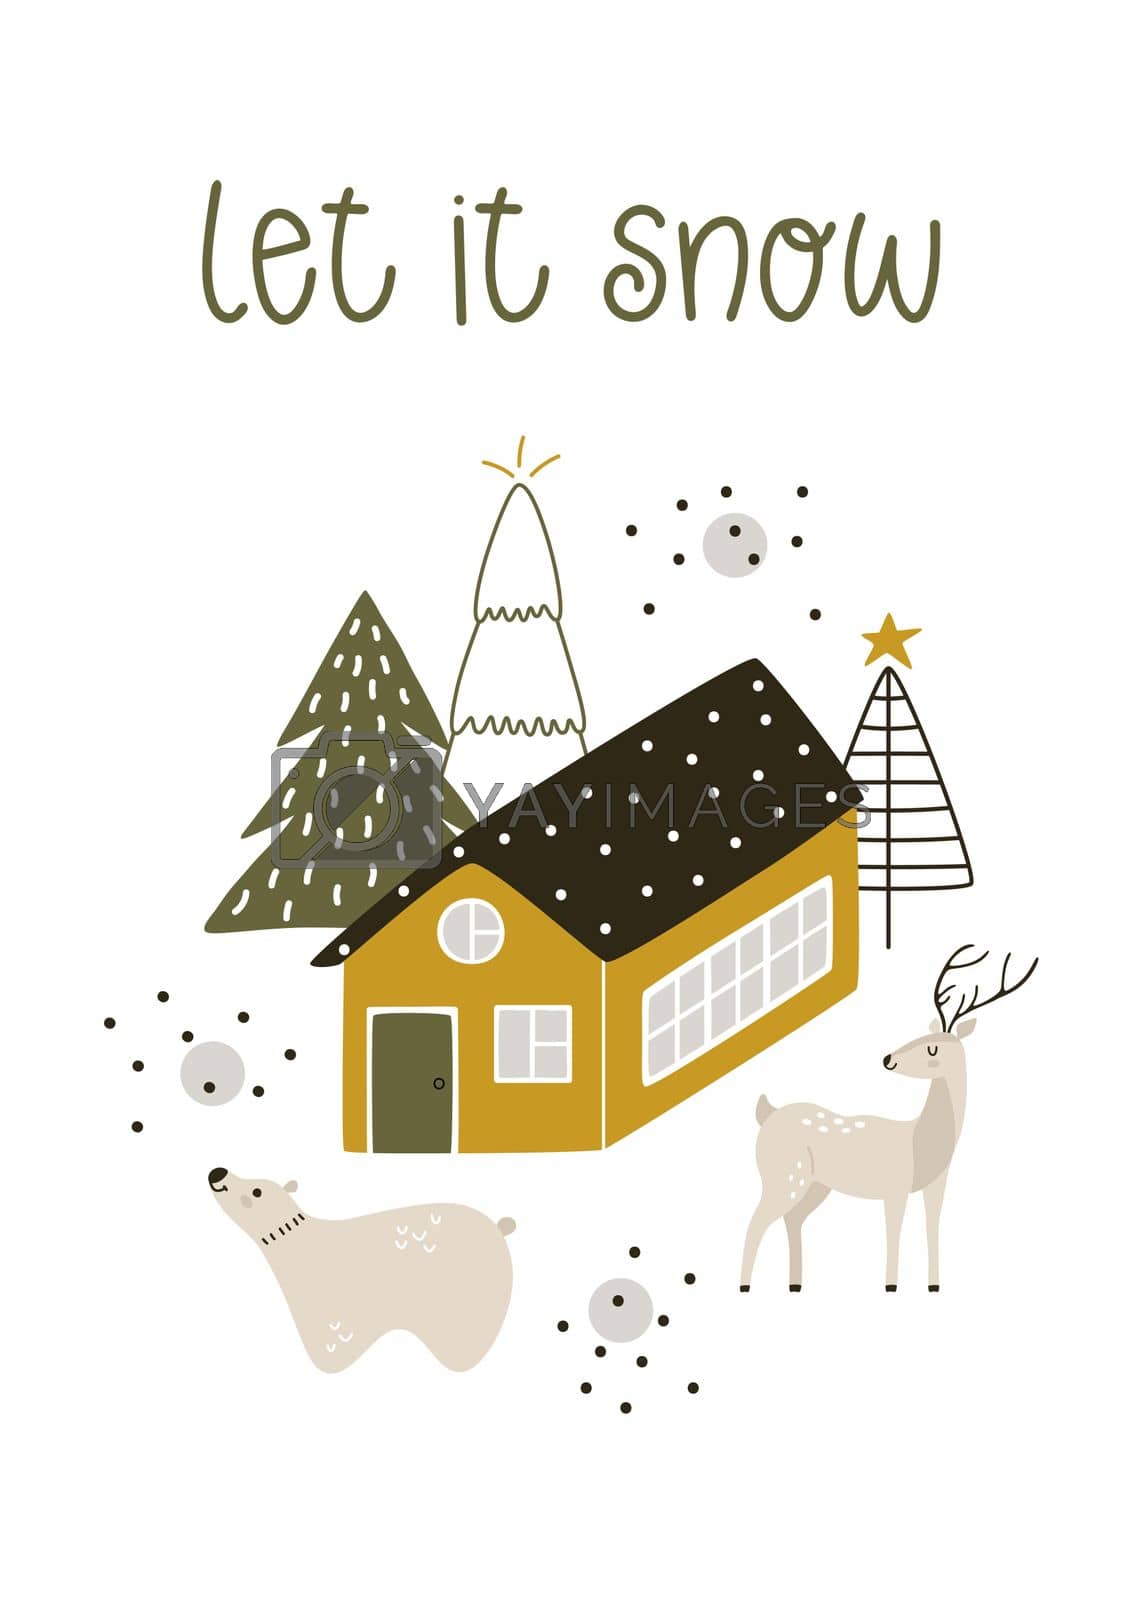 Royalty free image of Greeting card with an illustration of a house, Christmas trees, and winter animals by lera_feeva